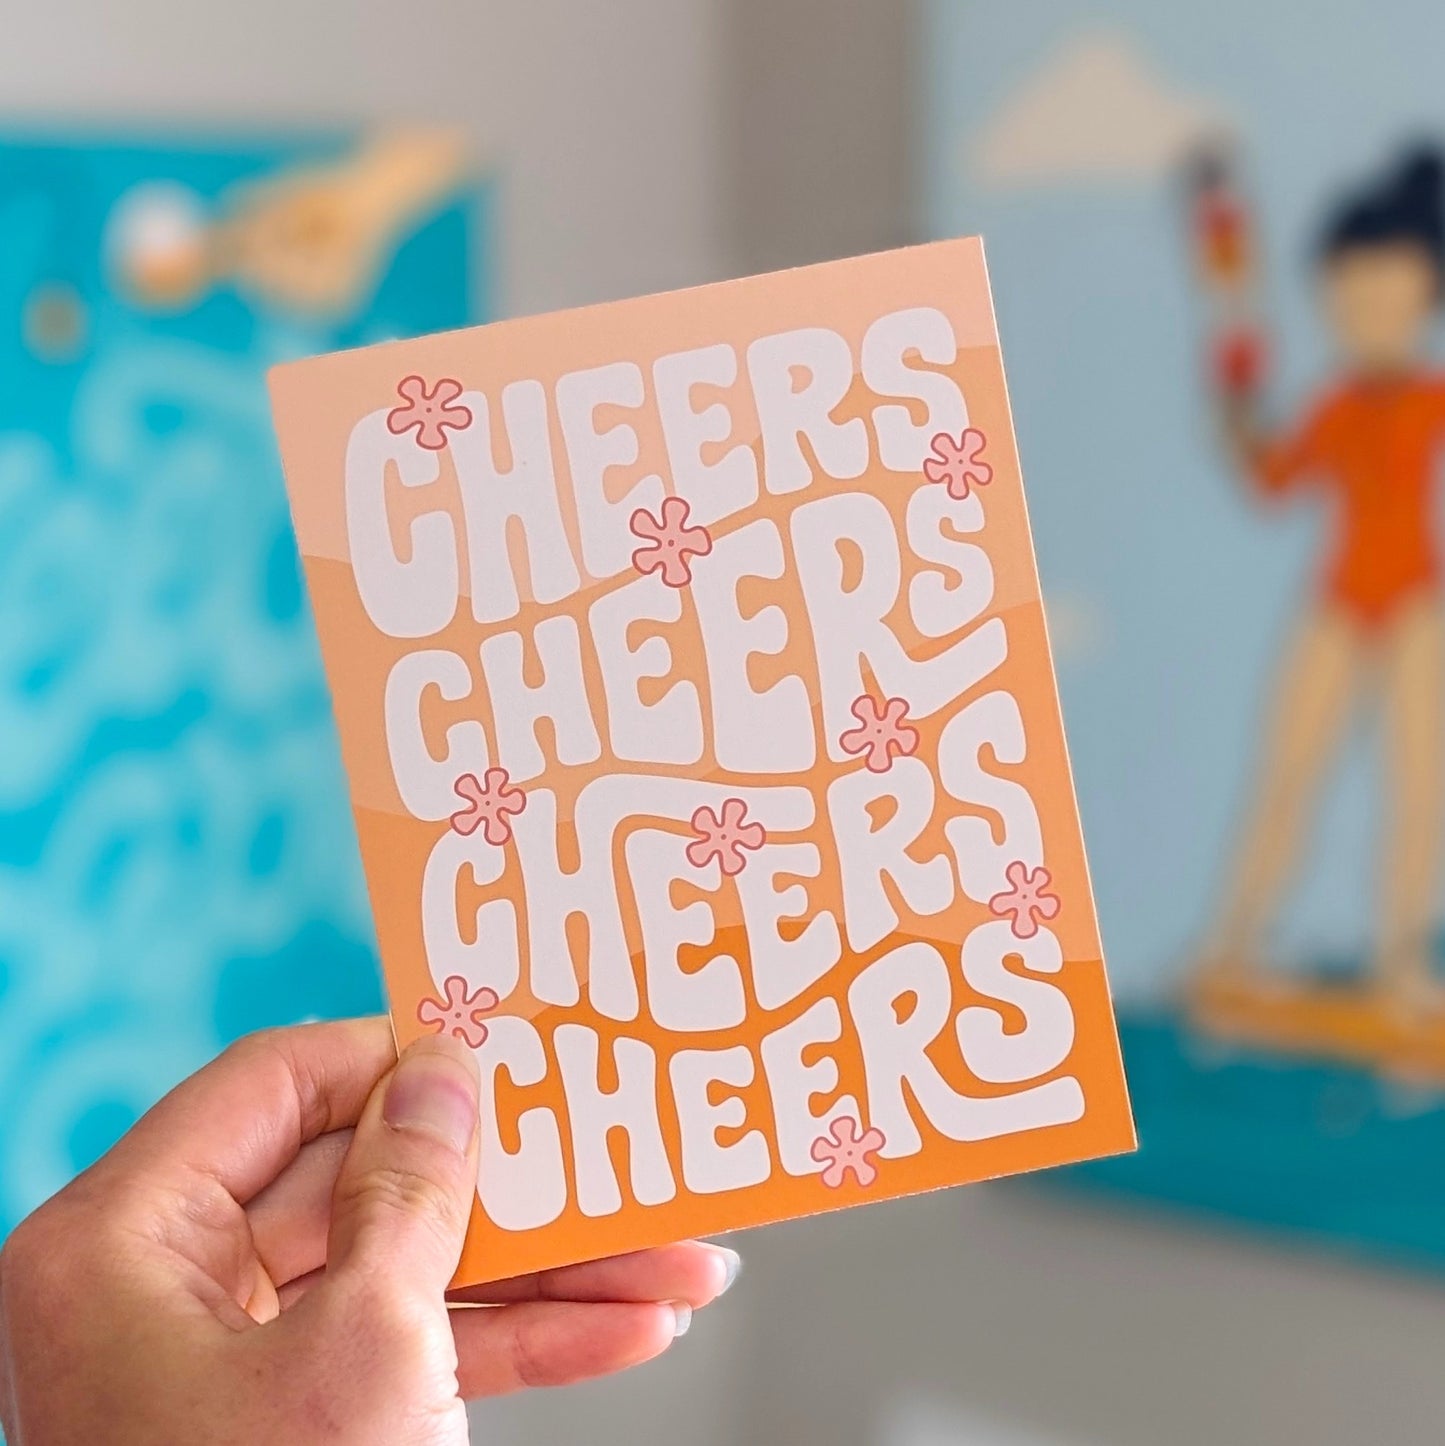 Groovy Lettering Cheers Celebration Card